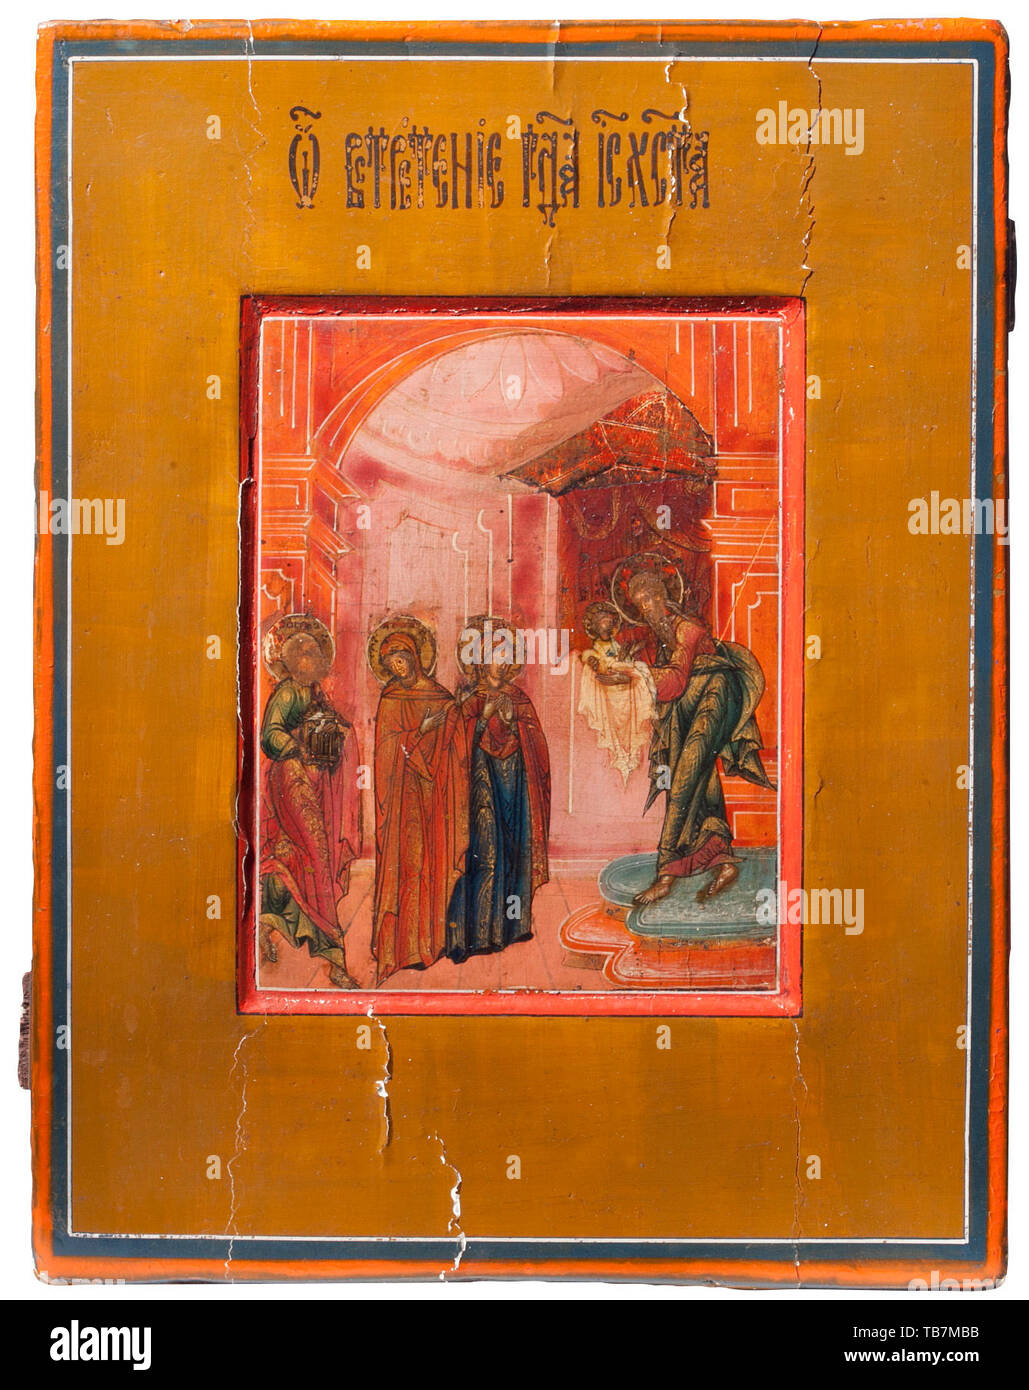 A Russian icon "Presentation of Jesus at the Temple", 19th century, Egg tempera on wood with a kovcheg depicting Jesus in the temple as a child. Mary and Joseph are present with gifts for the priest, and are also accompanied by Anne, the prophetess and mother of Mary. USA-lot. historic, historical 19th century, Additional-Rights-Clearance-Info-Not-Available Stock Photo